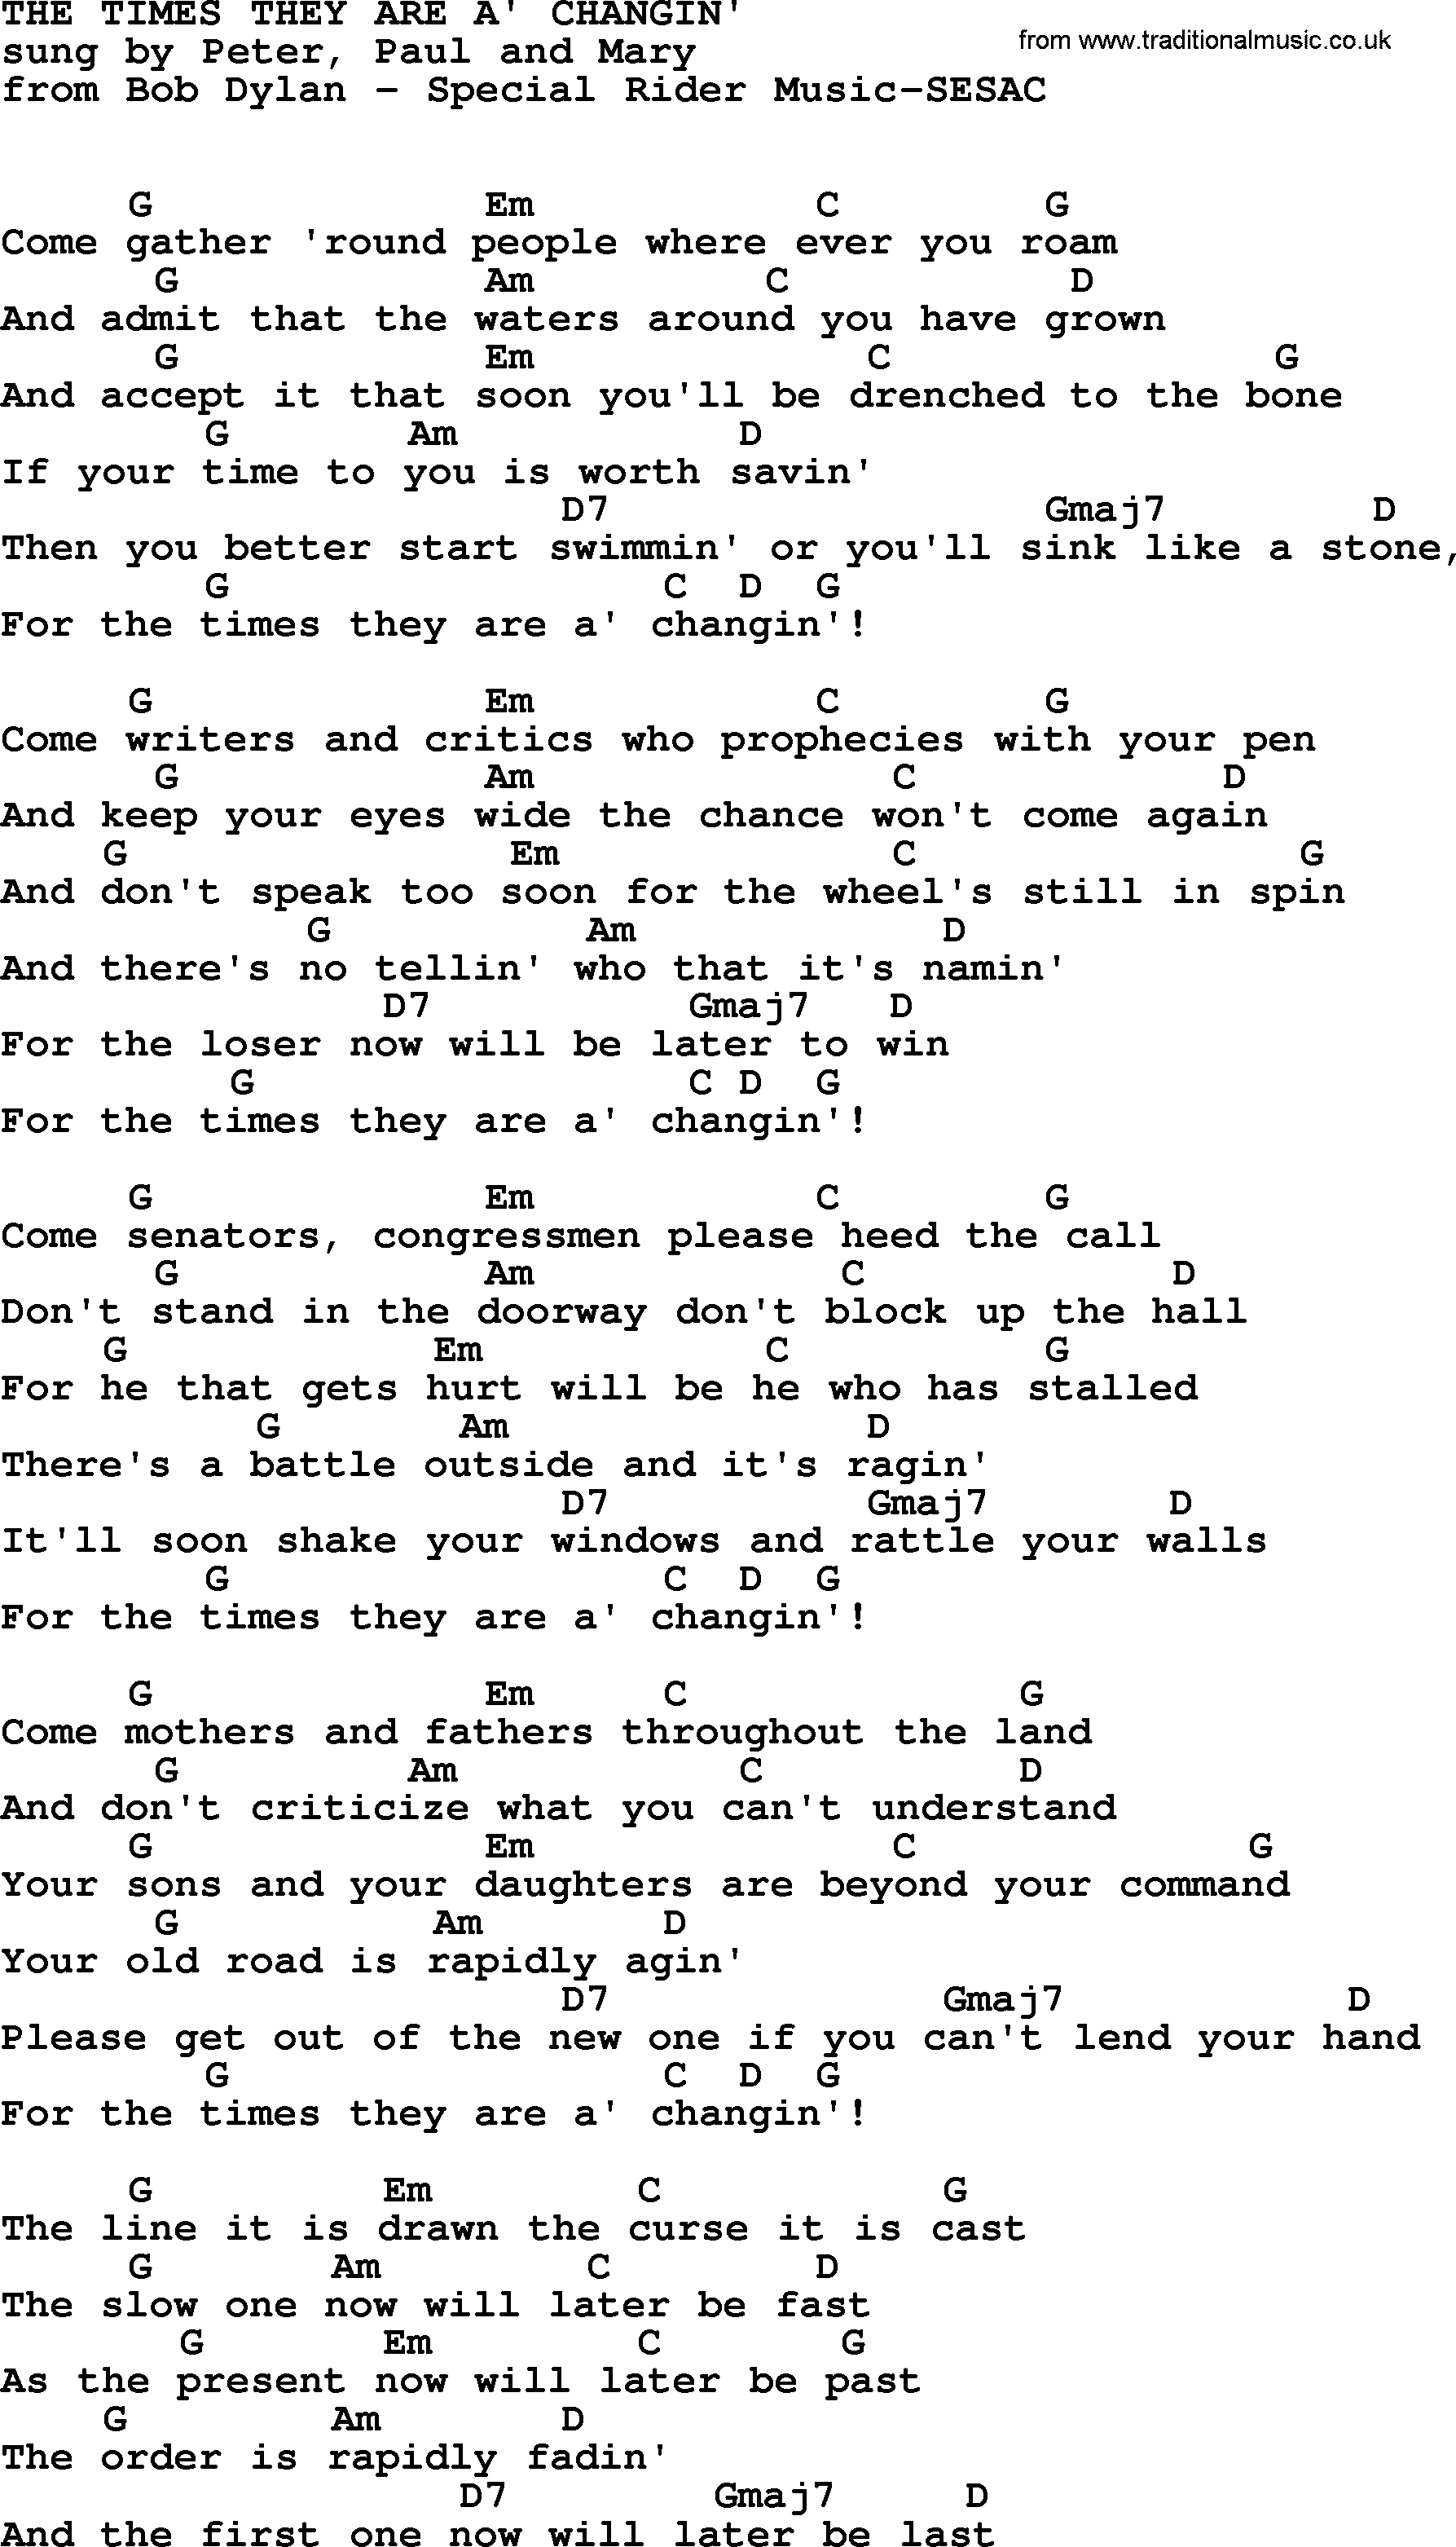 Peter, Paul and Mary song The Times They Are A Changing, lyrics and chords